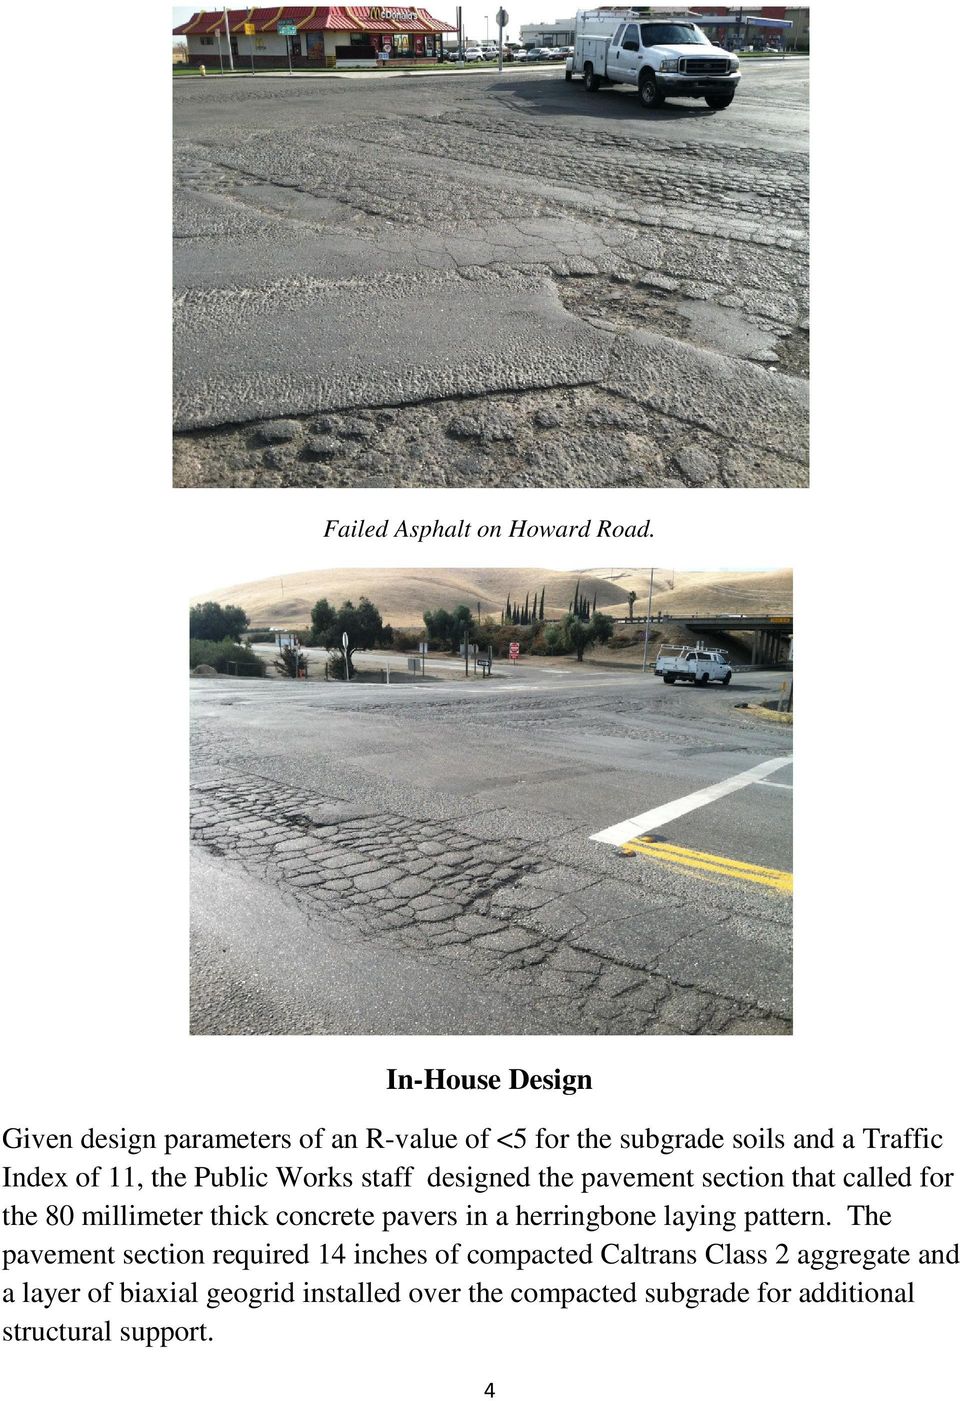 Public Works staff designed the pavement section that called for the 80 millimeter thick concrete pavers in a